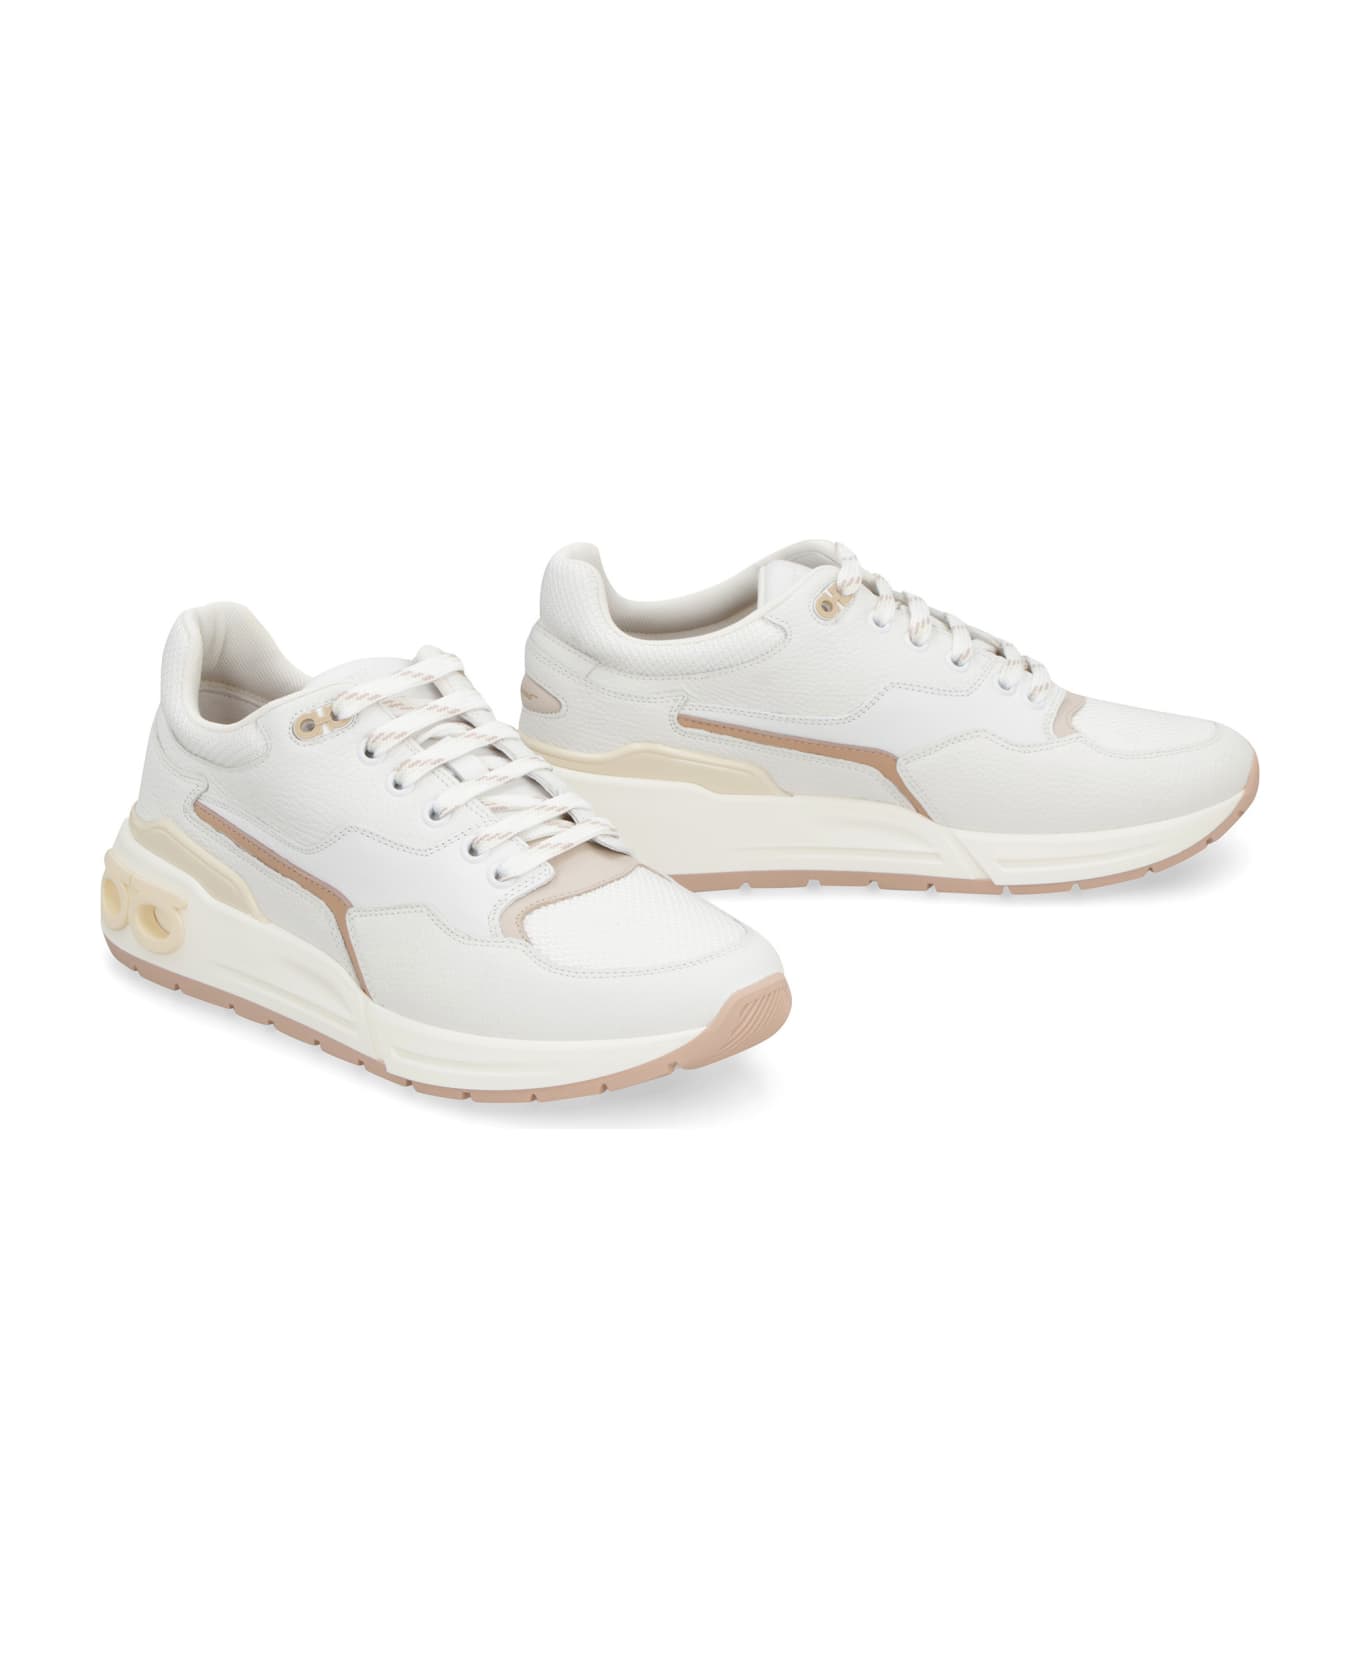 Ferragamo Leather And Fabric Low-top Sneakers - White スニーカー